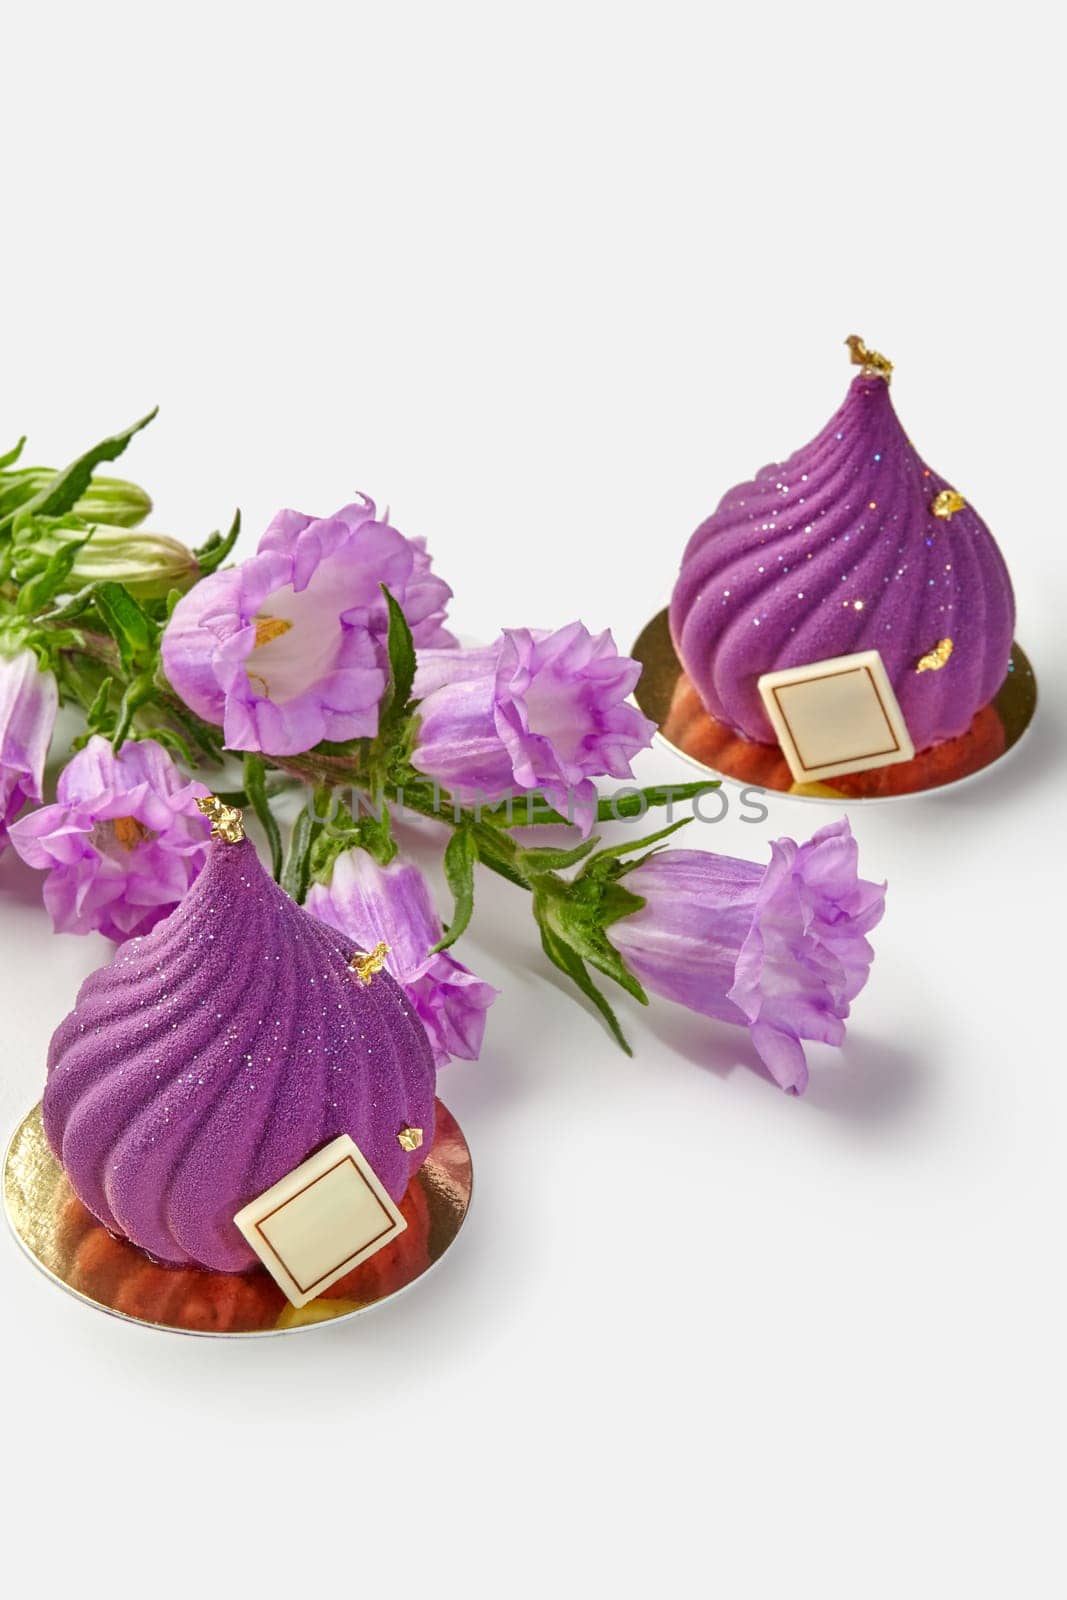 Two purple swirl-shaped pastries with flowers on white by nazarovsergey